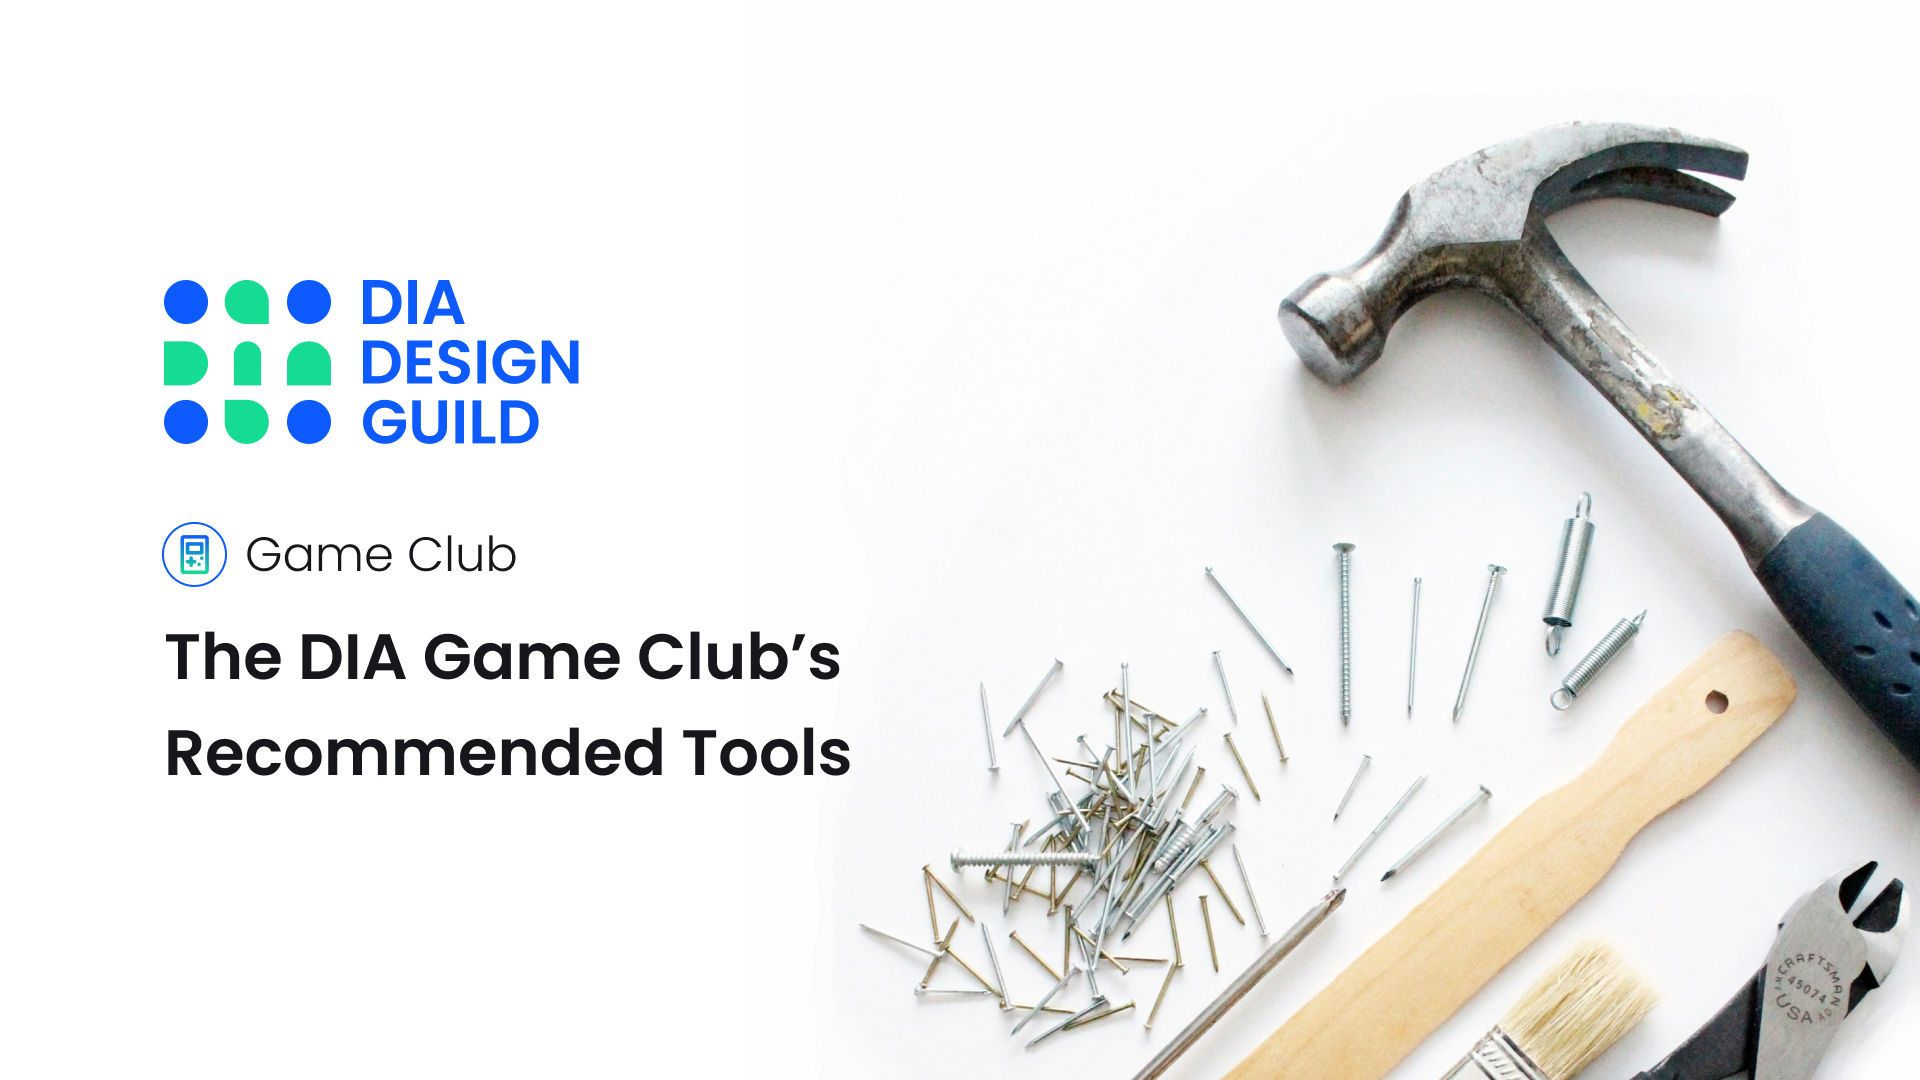 The DIA Game Club’s Recommended Tools